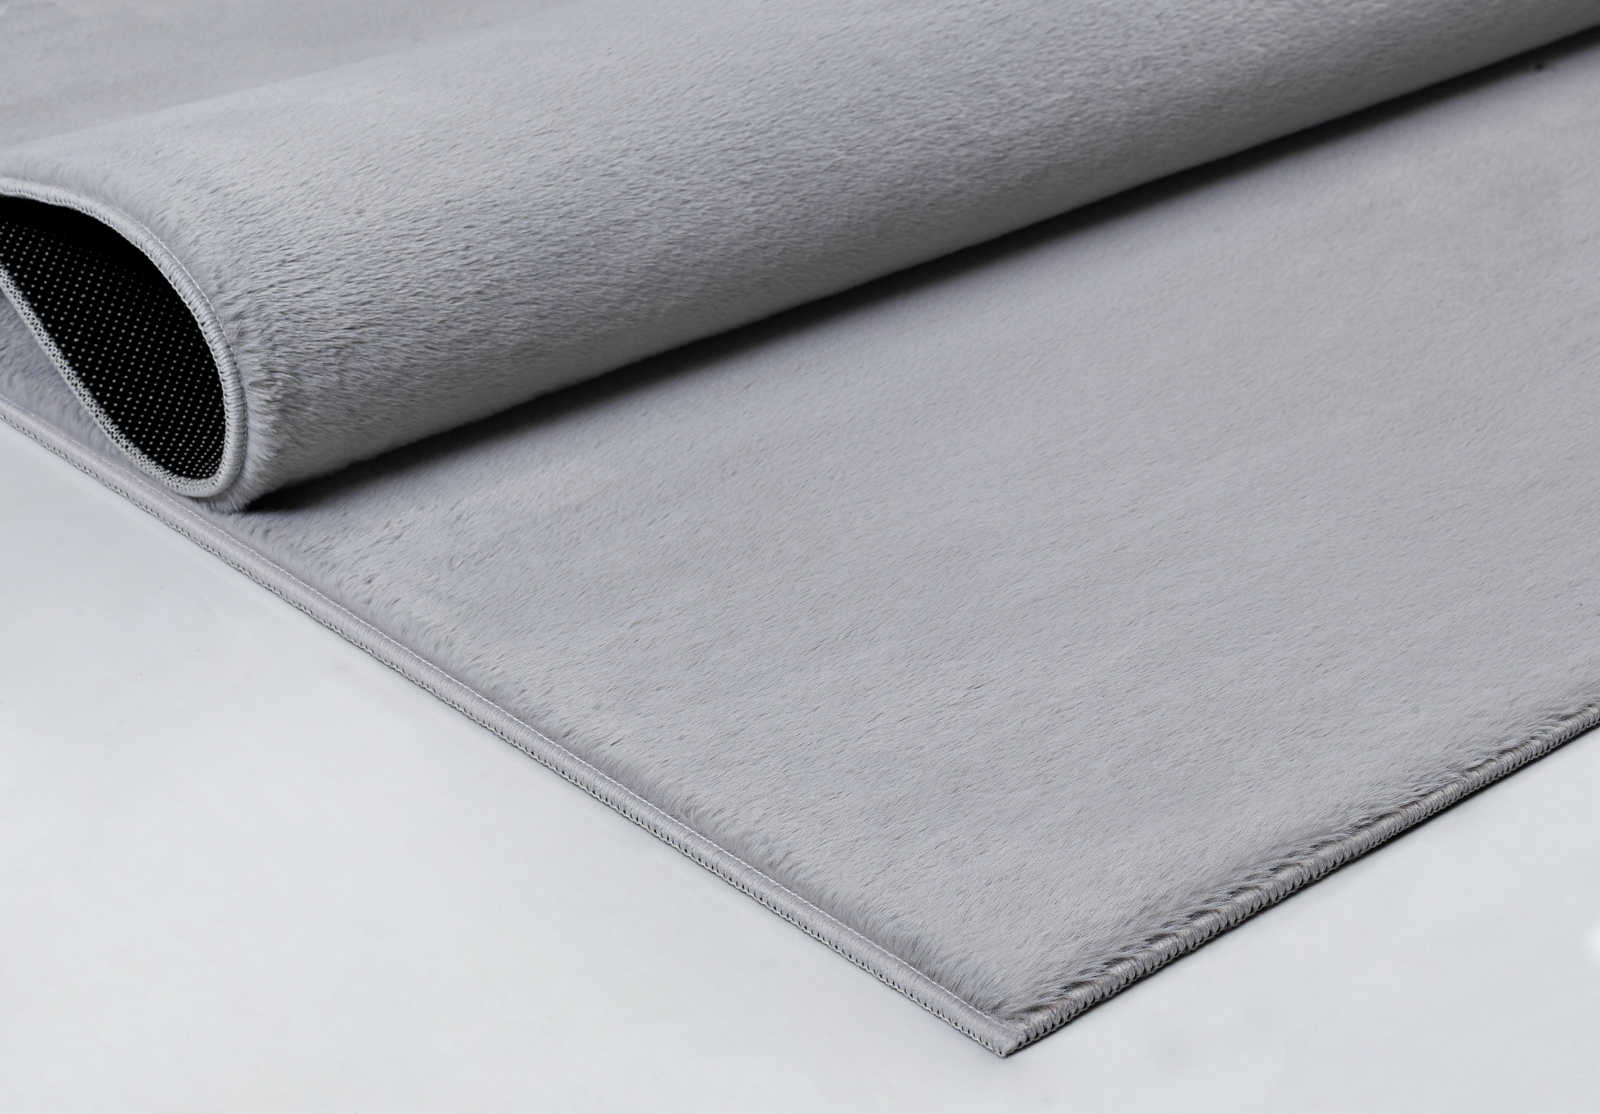             Comfortable high pile carpet in soft grey - 140 x 70 cm
        